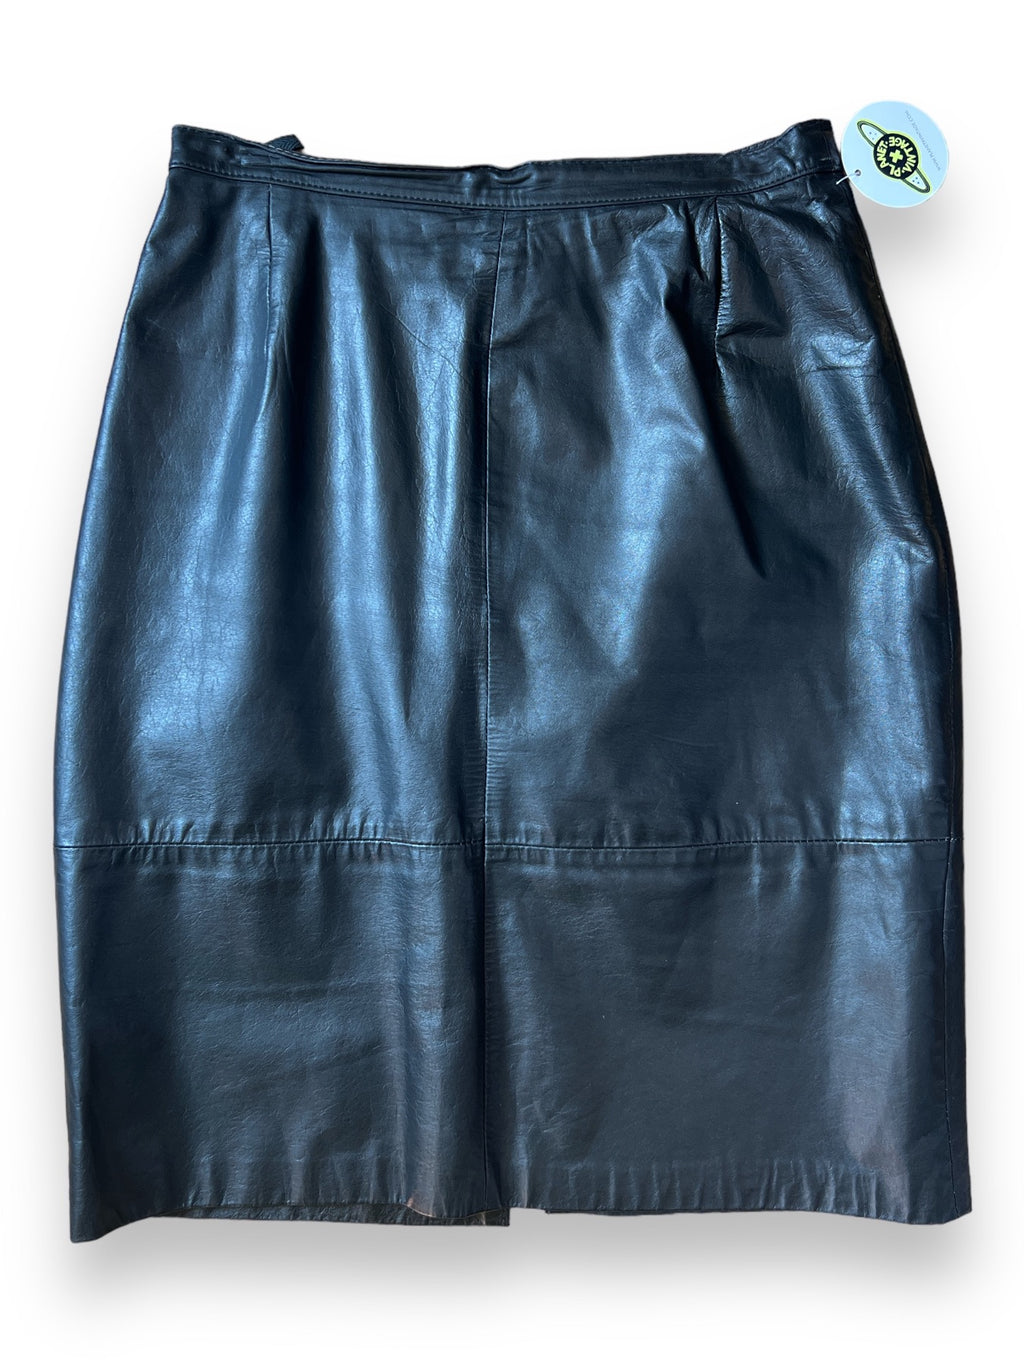 COMINT BLACK LEATHER SKIRT